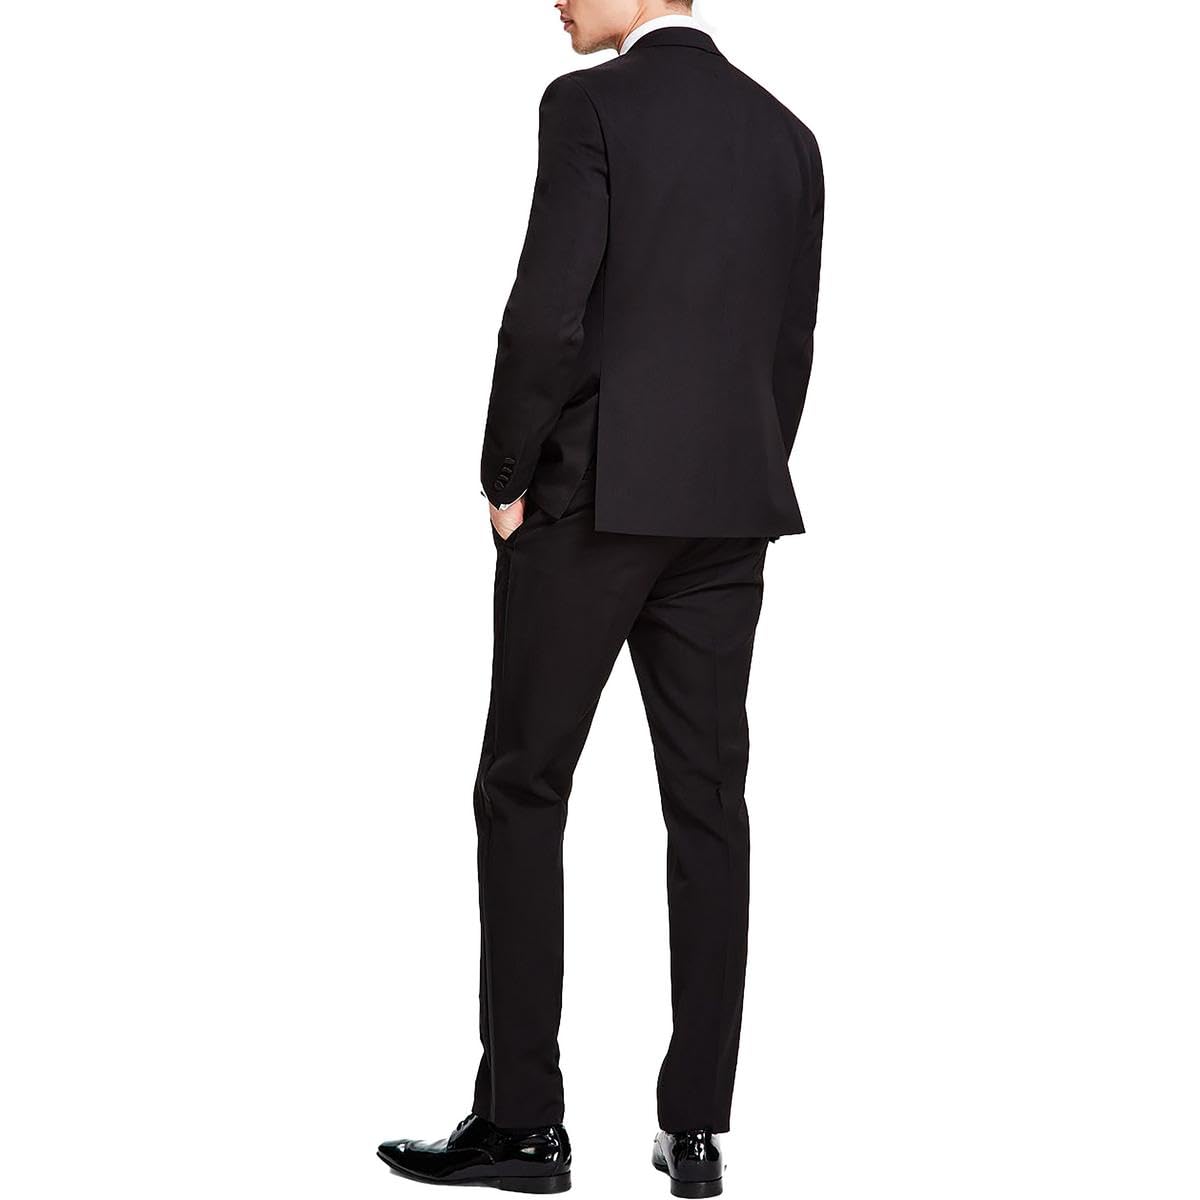 Kenneth Cole REACTION Men's Performance Fabric Tuxedo, Formal Suit for Black Tie